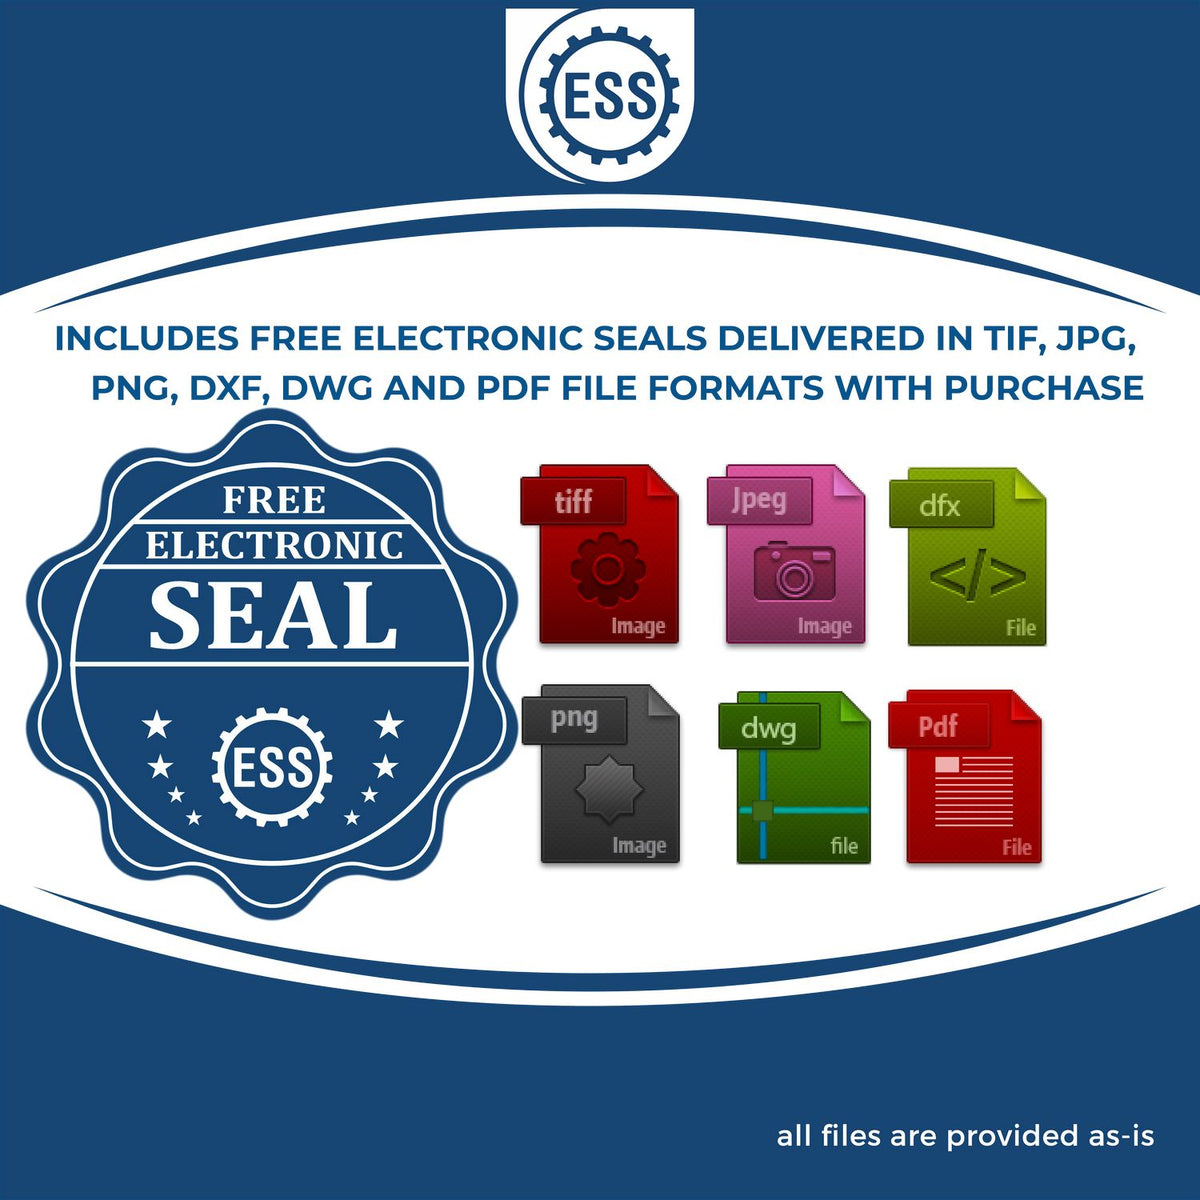 An infographic for the free electronic seal for the Self-Inking Vermont Geologist Stamp illustrating the different file type icons such as DXF, DWG, TIF, JPG and PNG.